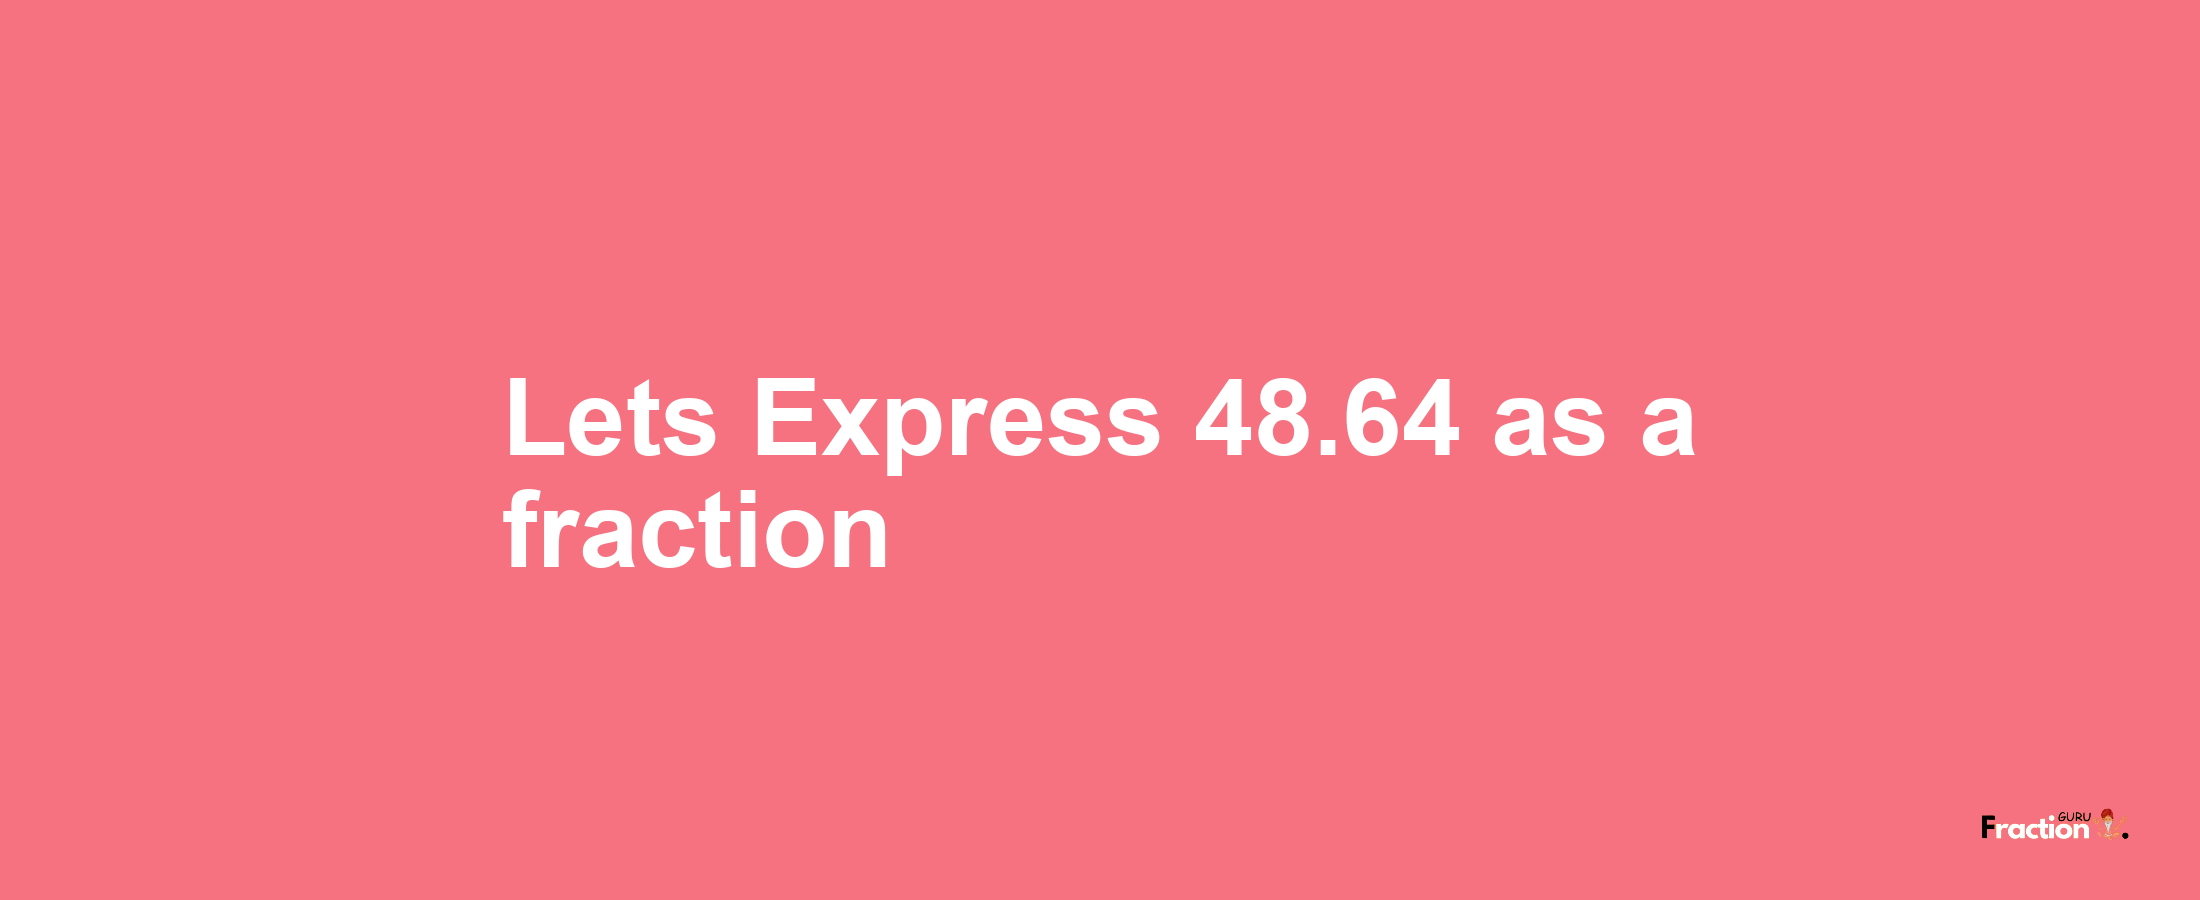 Lets Express 48.64 as afraction